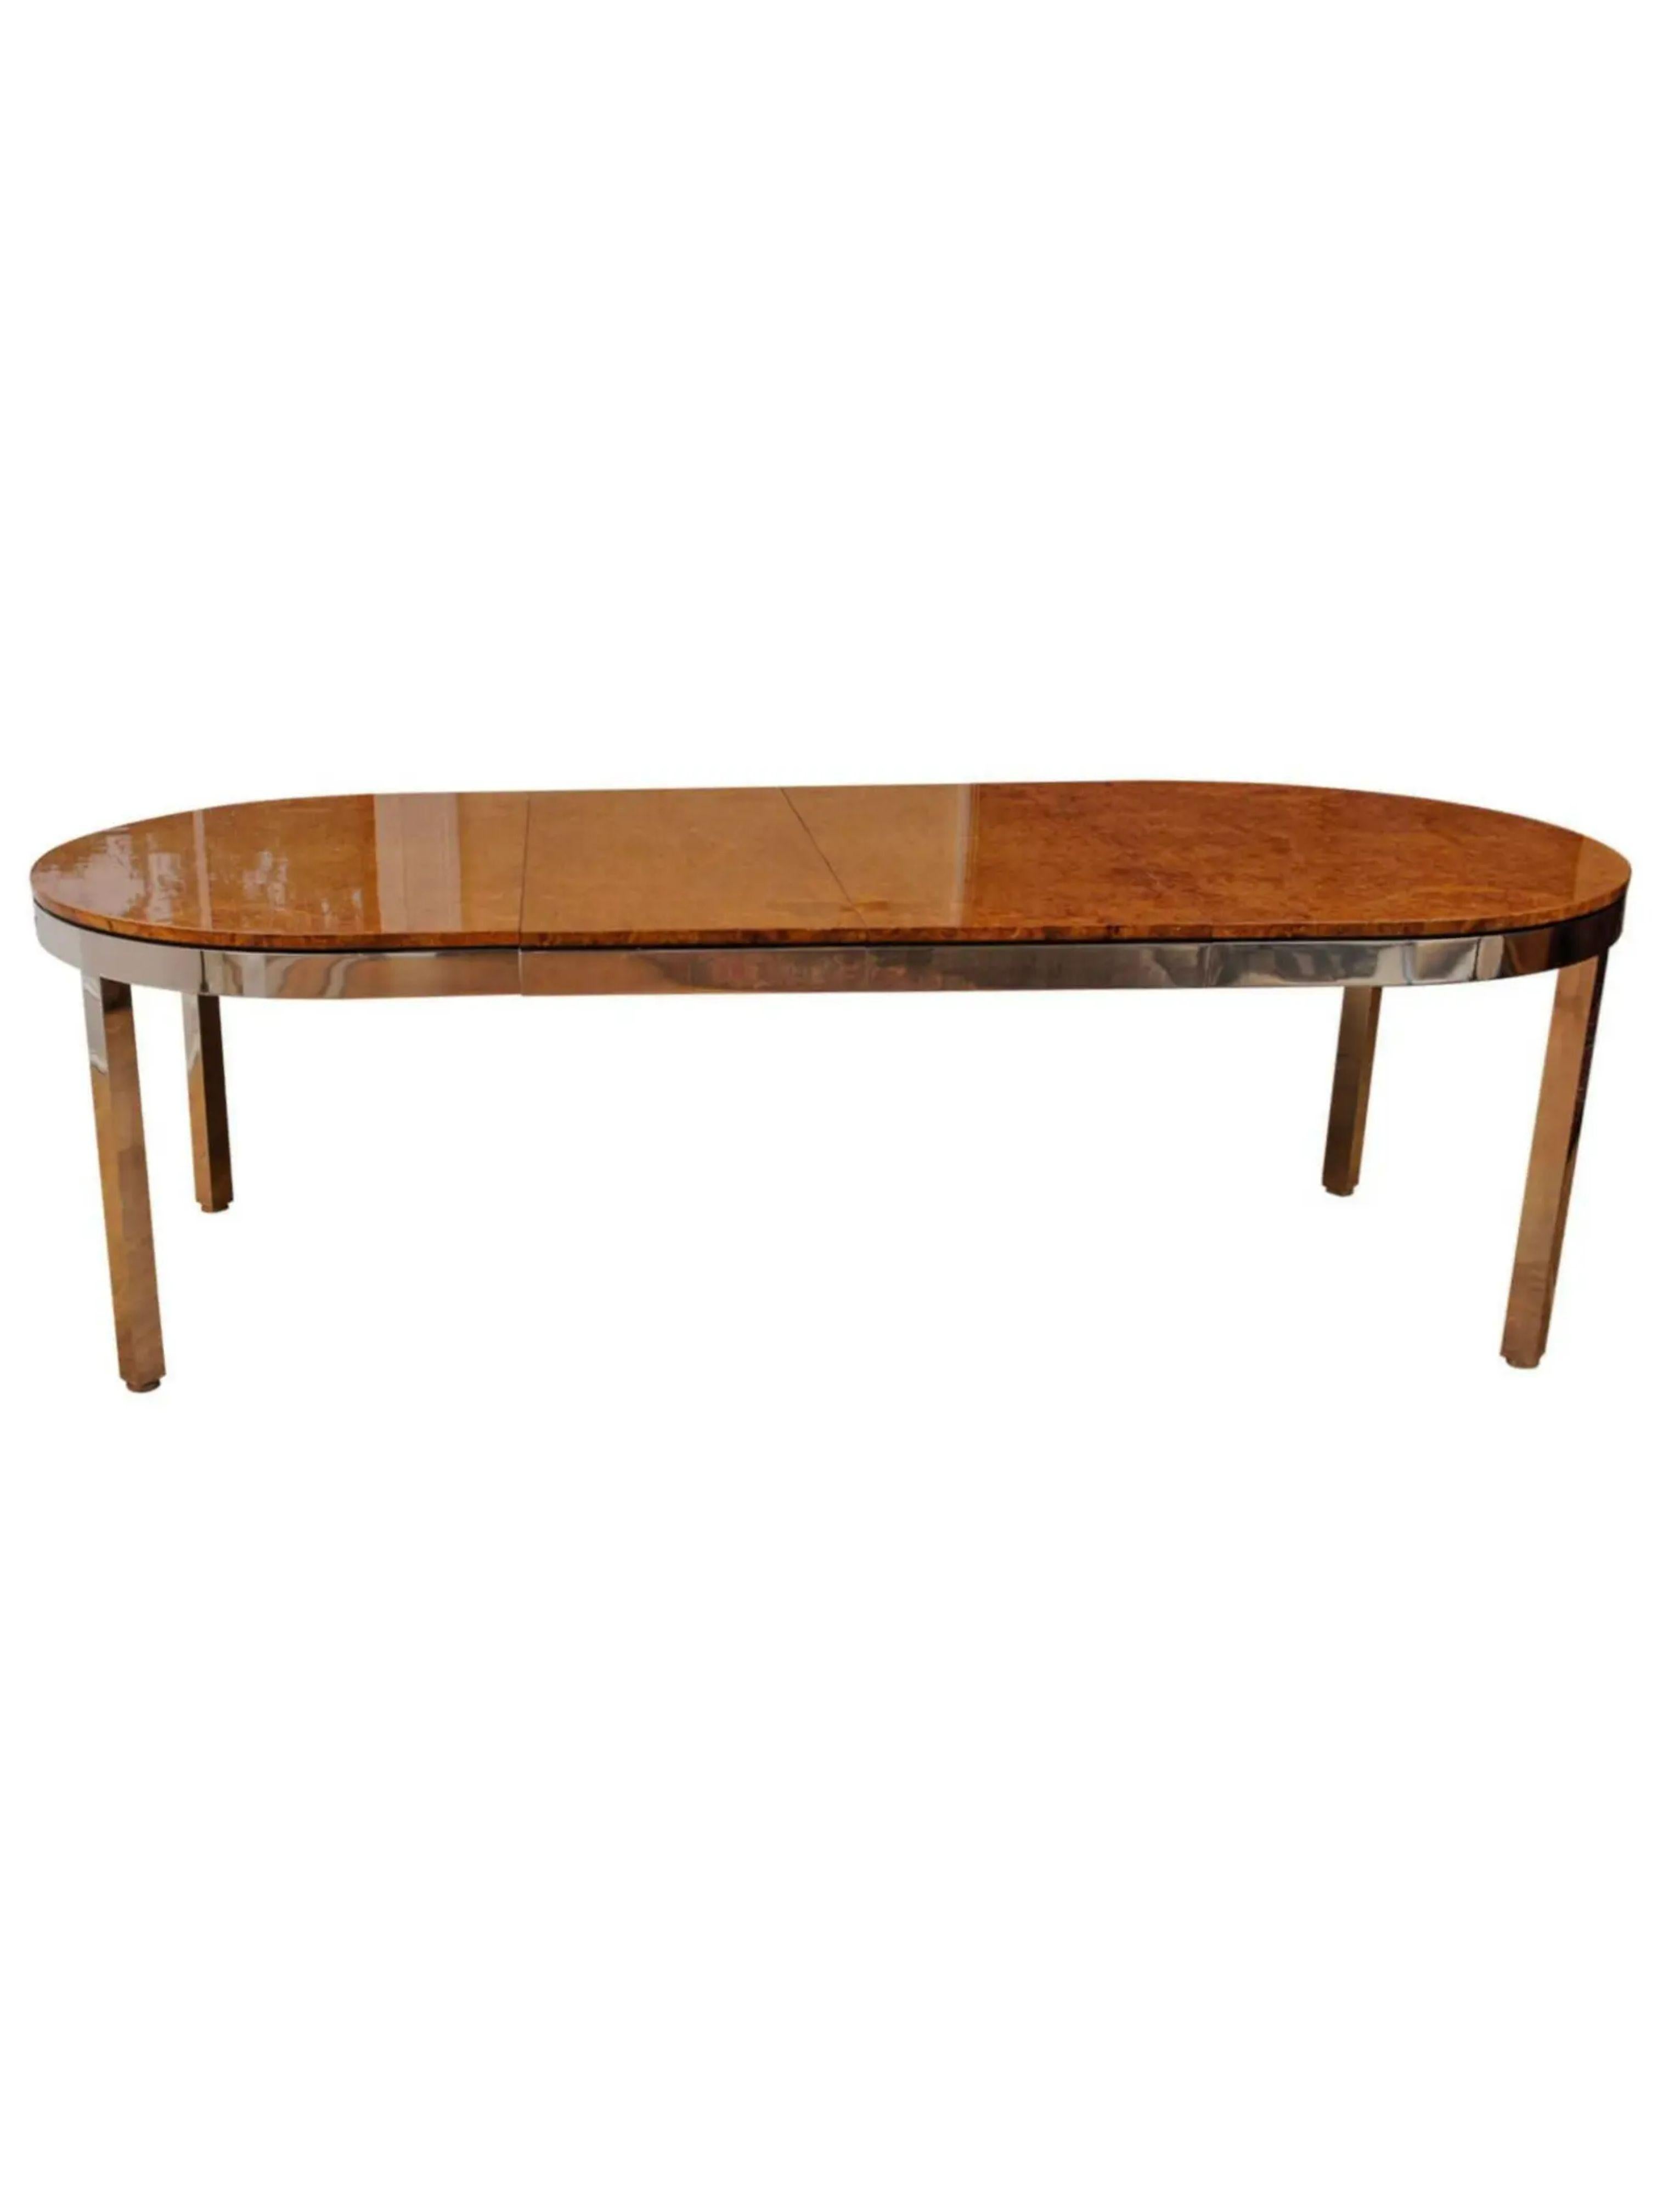 Pace Collection Burl Wood & Chrome Dining Table, 1979 In Good Condition For Sale In LOS ANGELES, CA